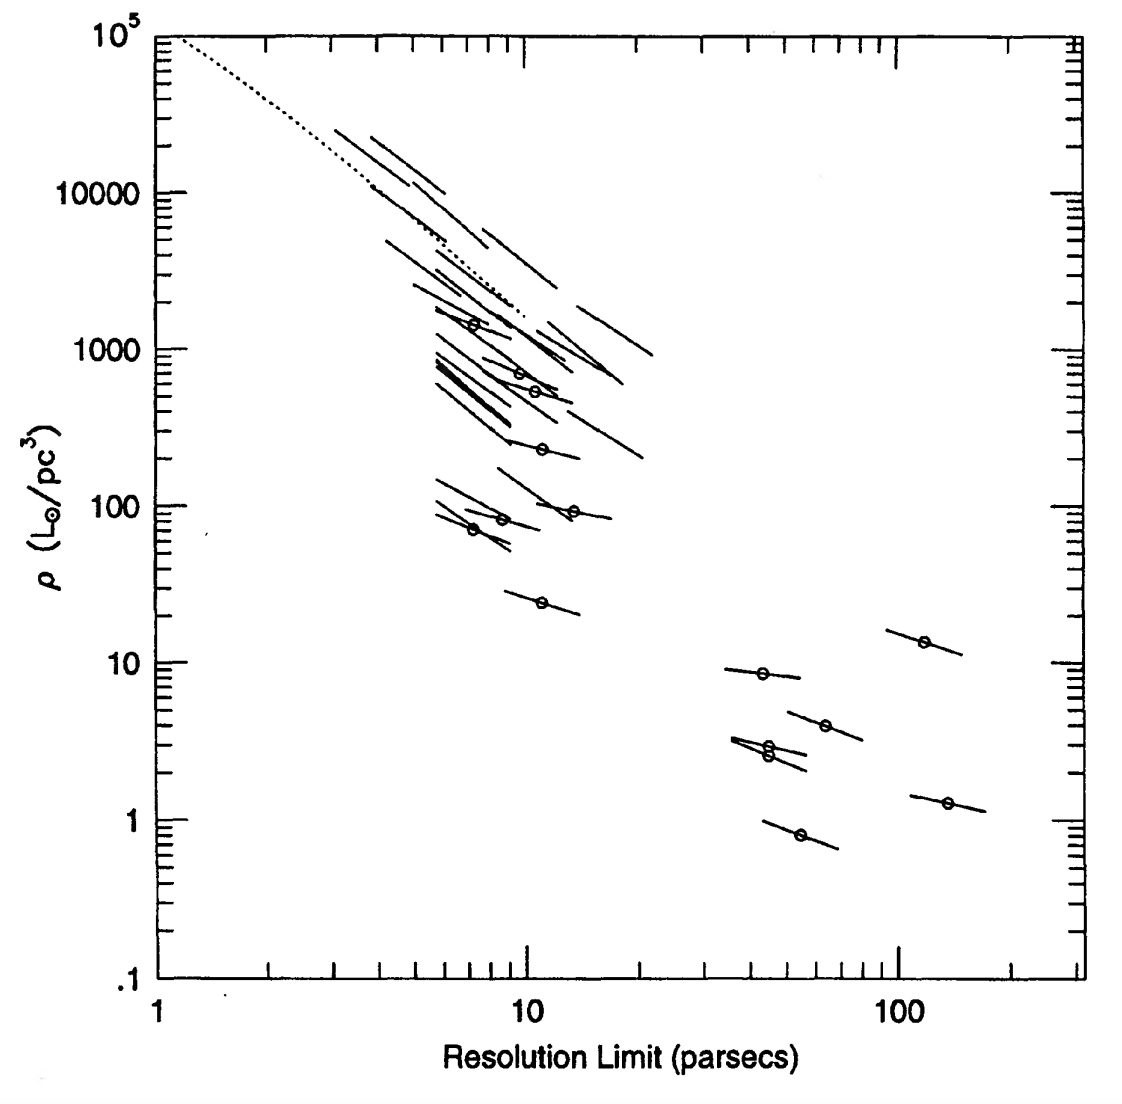 Figure 13 from Lauer et al. (1985): luminosity density and its slope at the innermost observed point for HST-observed elliptical galaxies